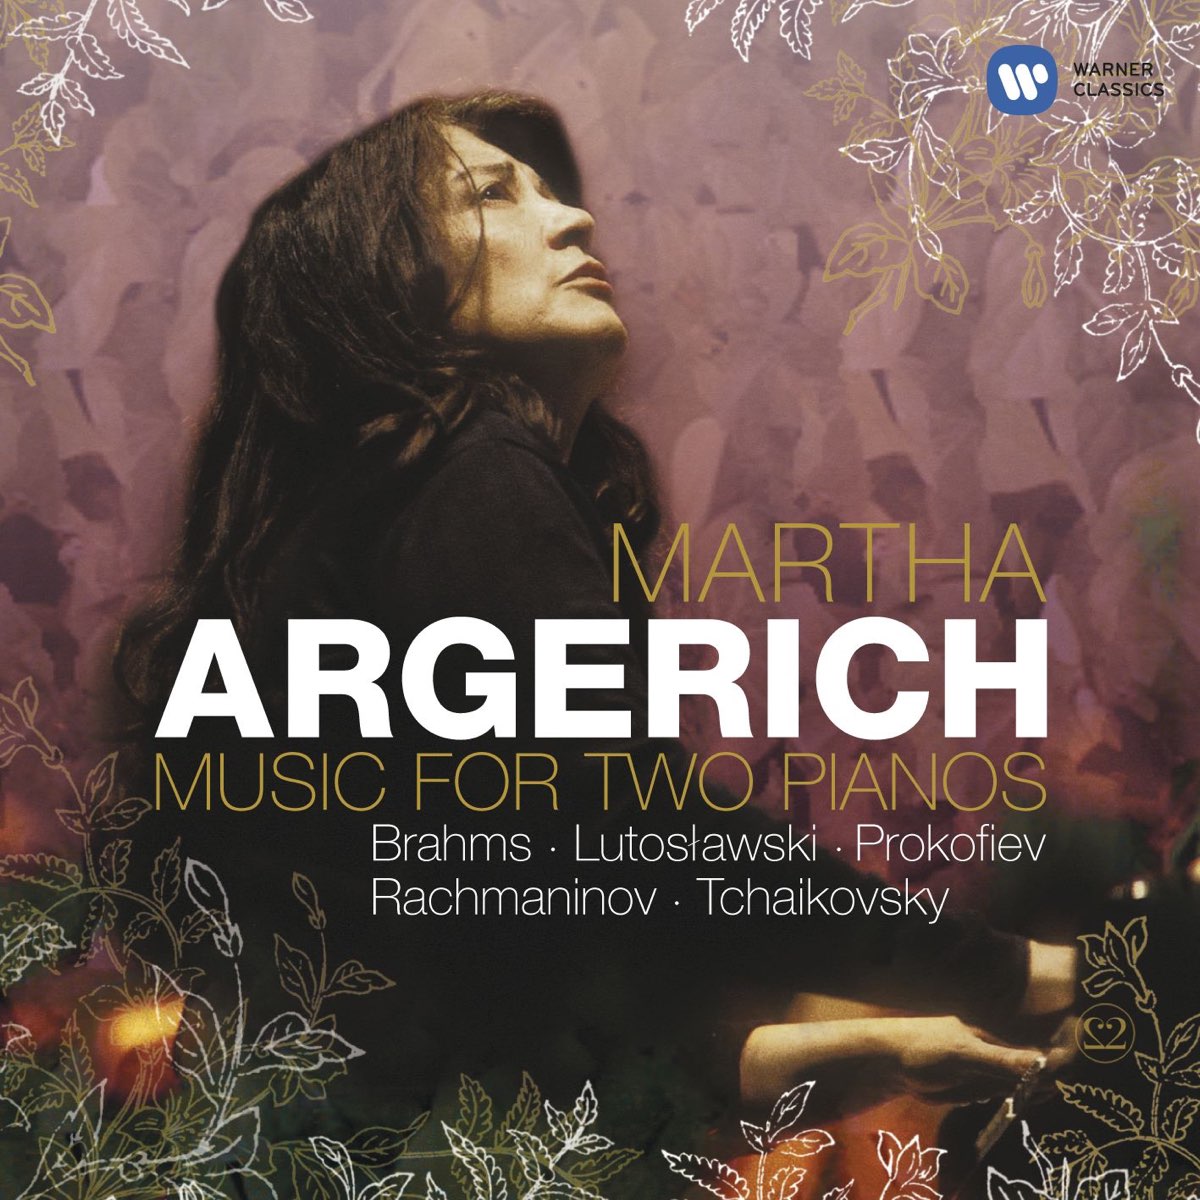 Martha Argerich Plays Tchaikovsky and Prokofiev. Two pianos